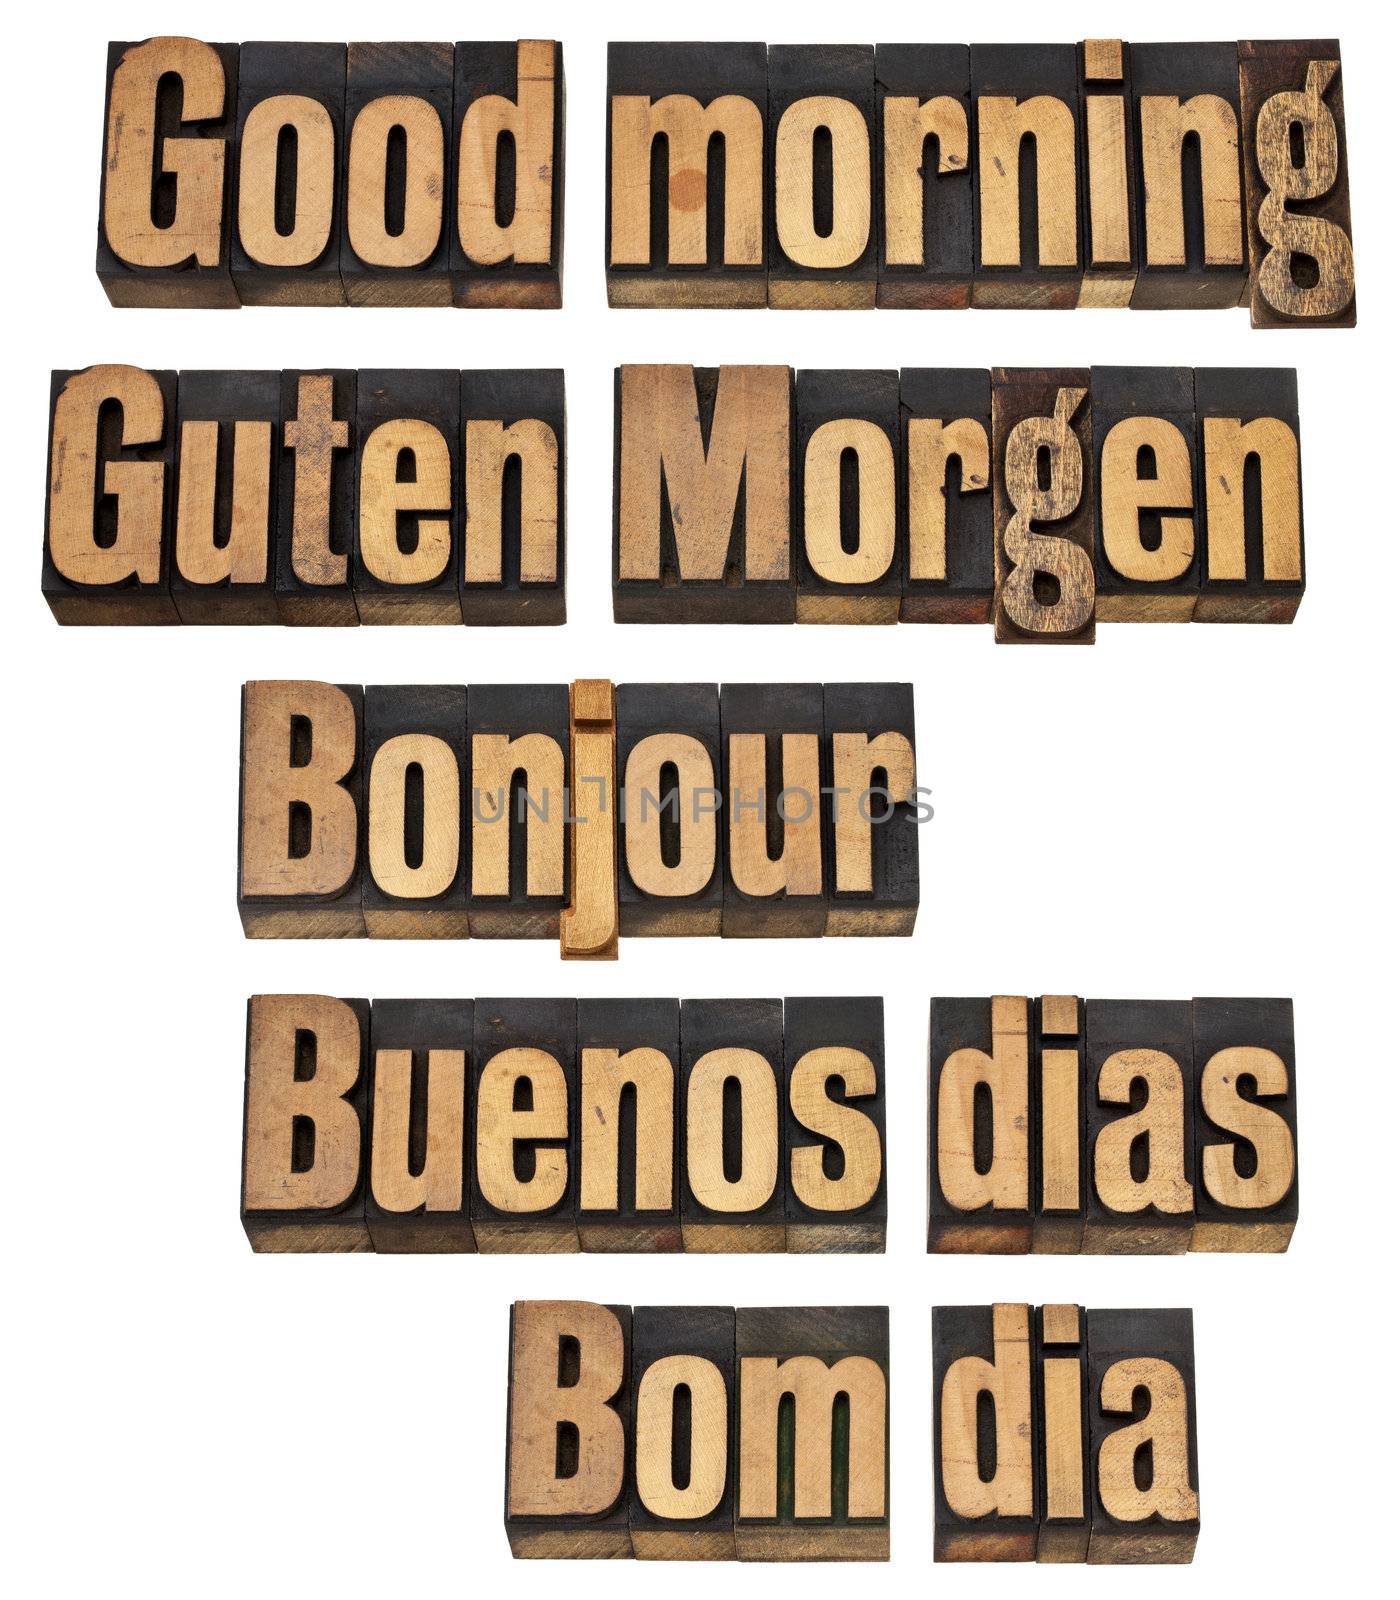 Good morning in five languages by PixelsAway